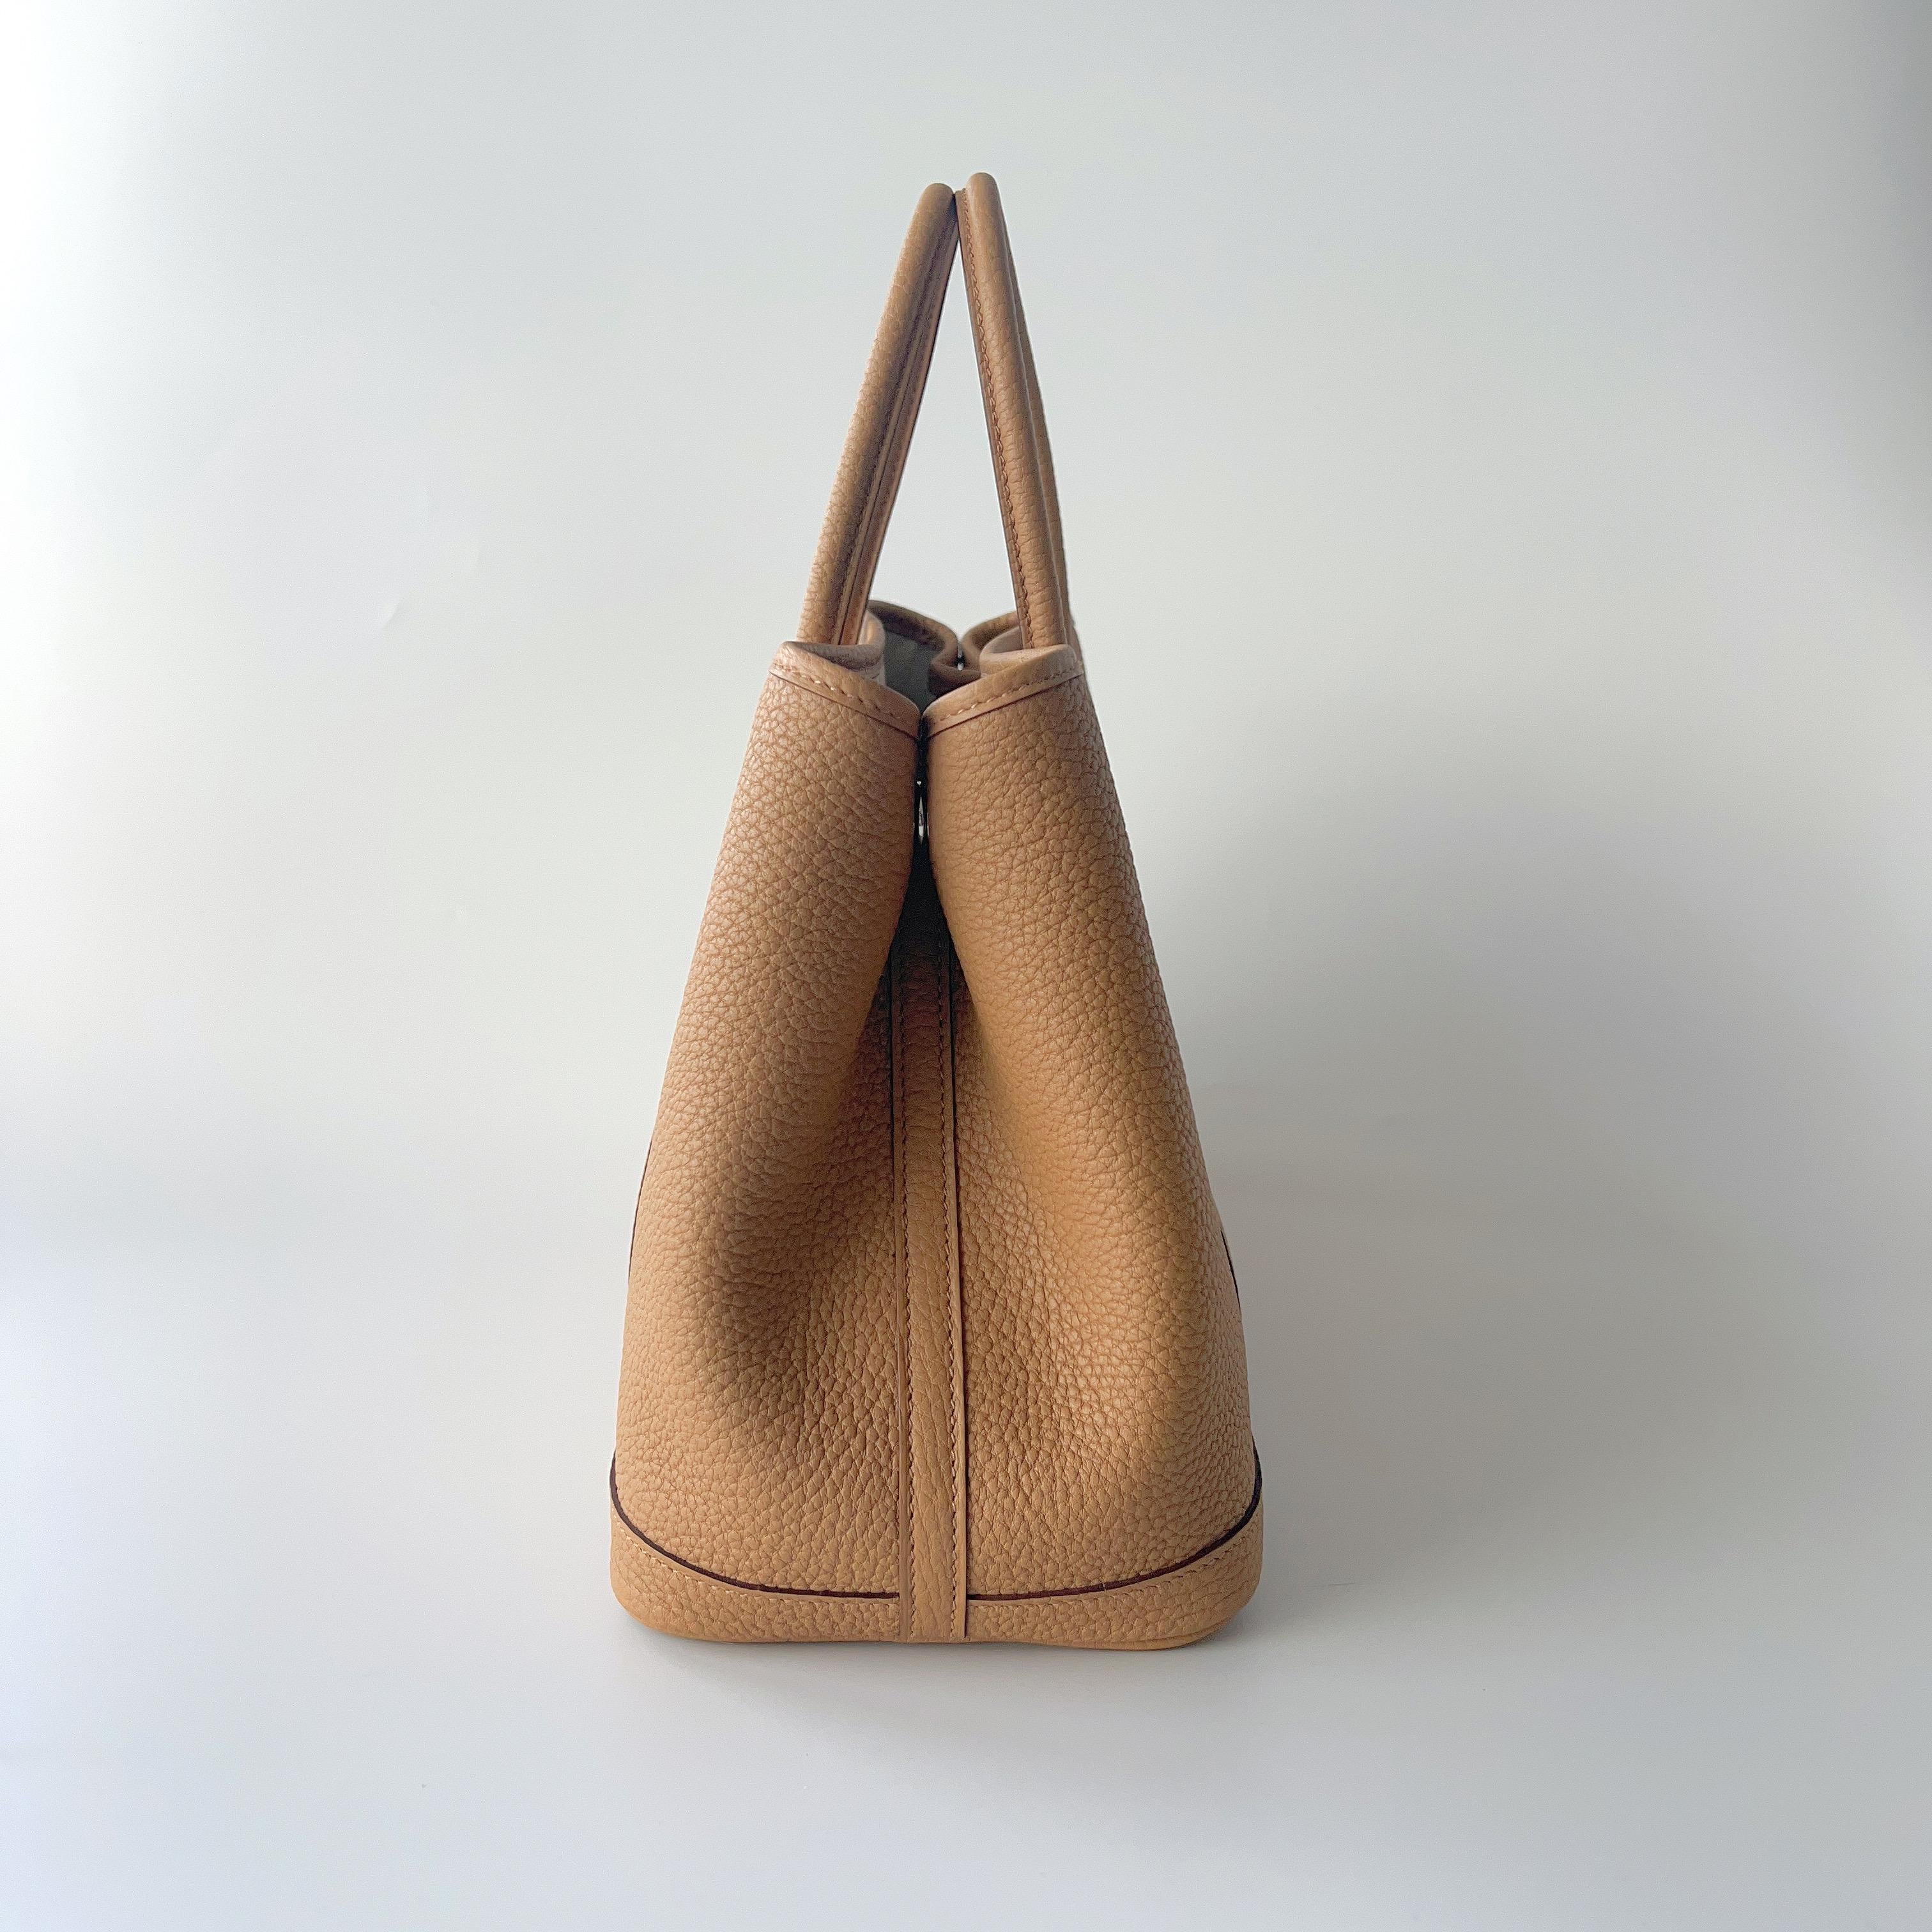 Shop this elegant Hermès Garden Party 30 in the warm caramel colour of Biscuit. Imagine the colour to being close to a digestive biscuit. It is in the Negonda Leather. This beautiful shade of warm neutral perfection, and is the perfect about town